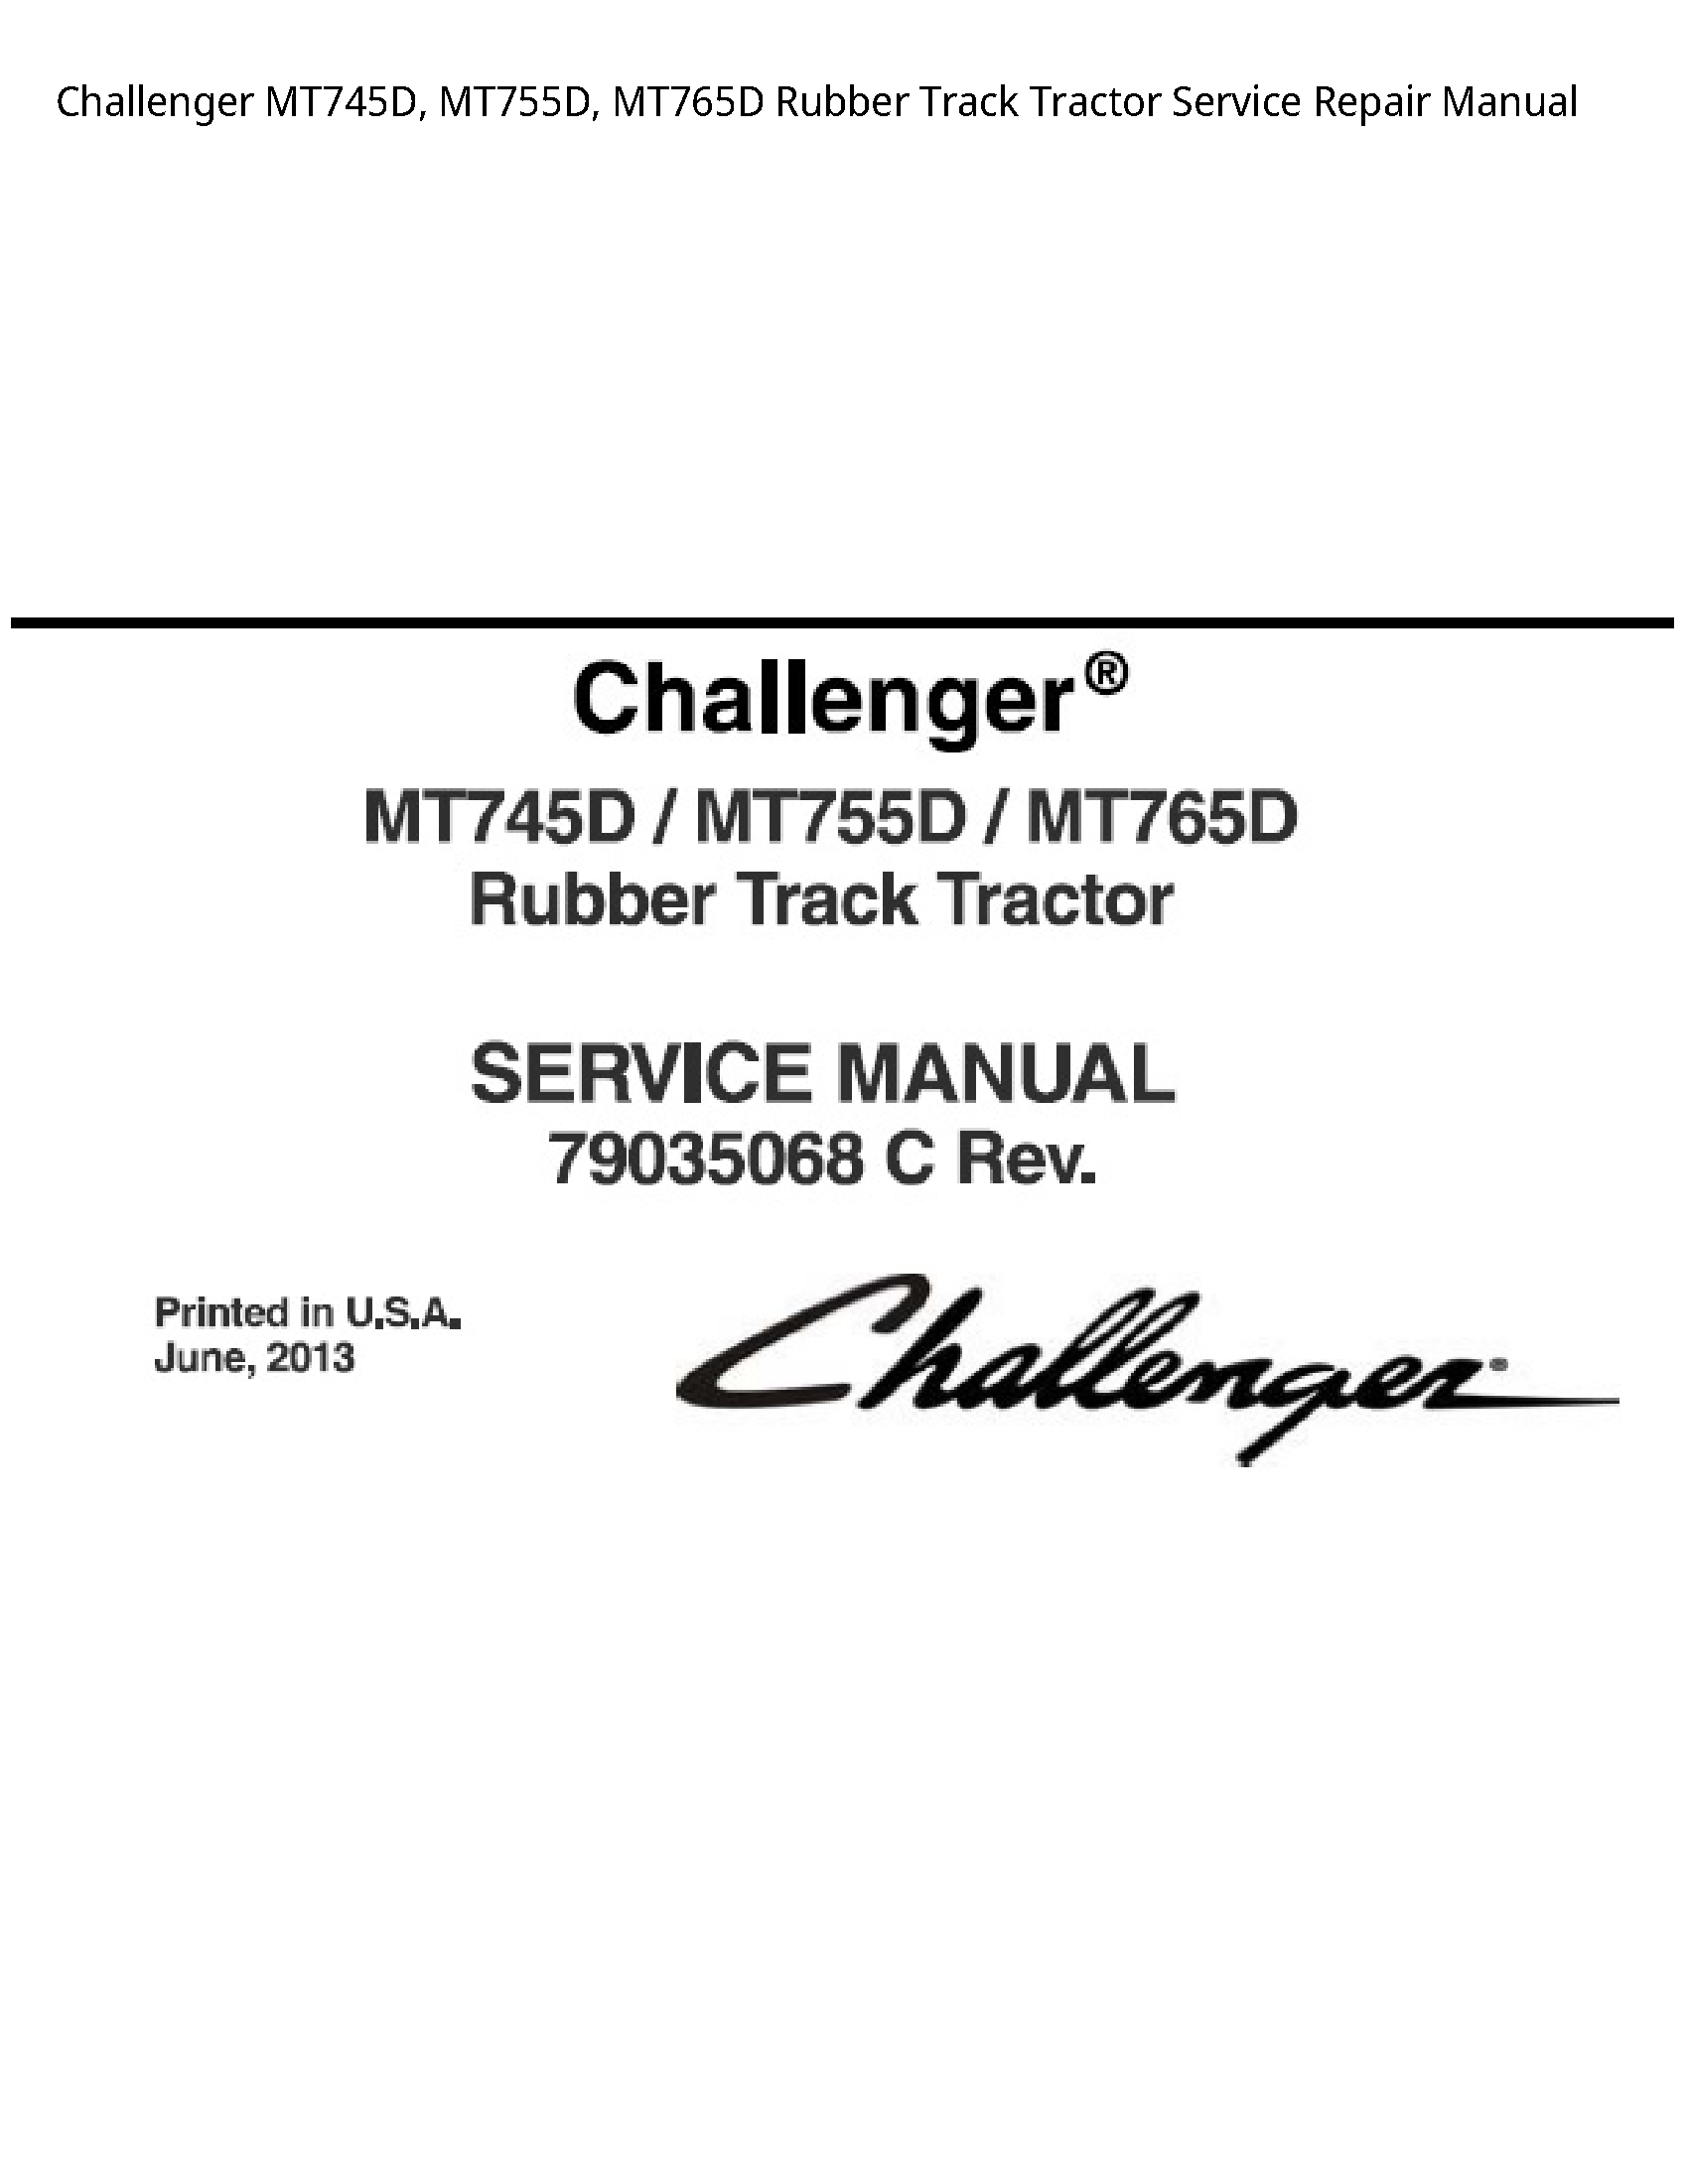 Challenger MT745D Rubber Track Tractor manual